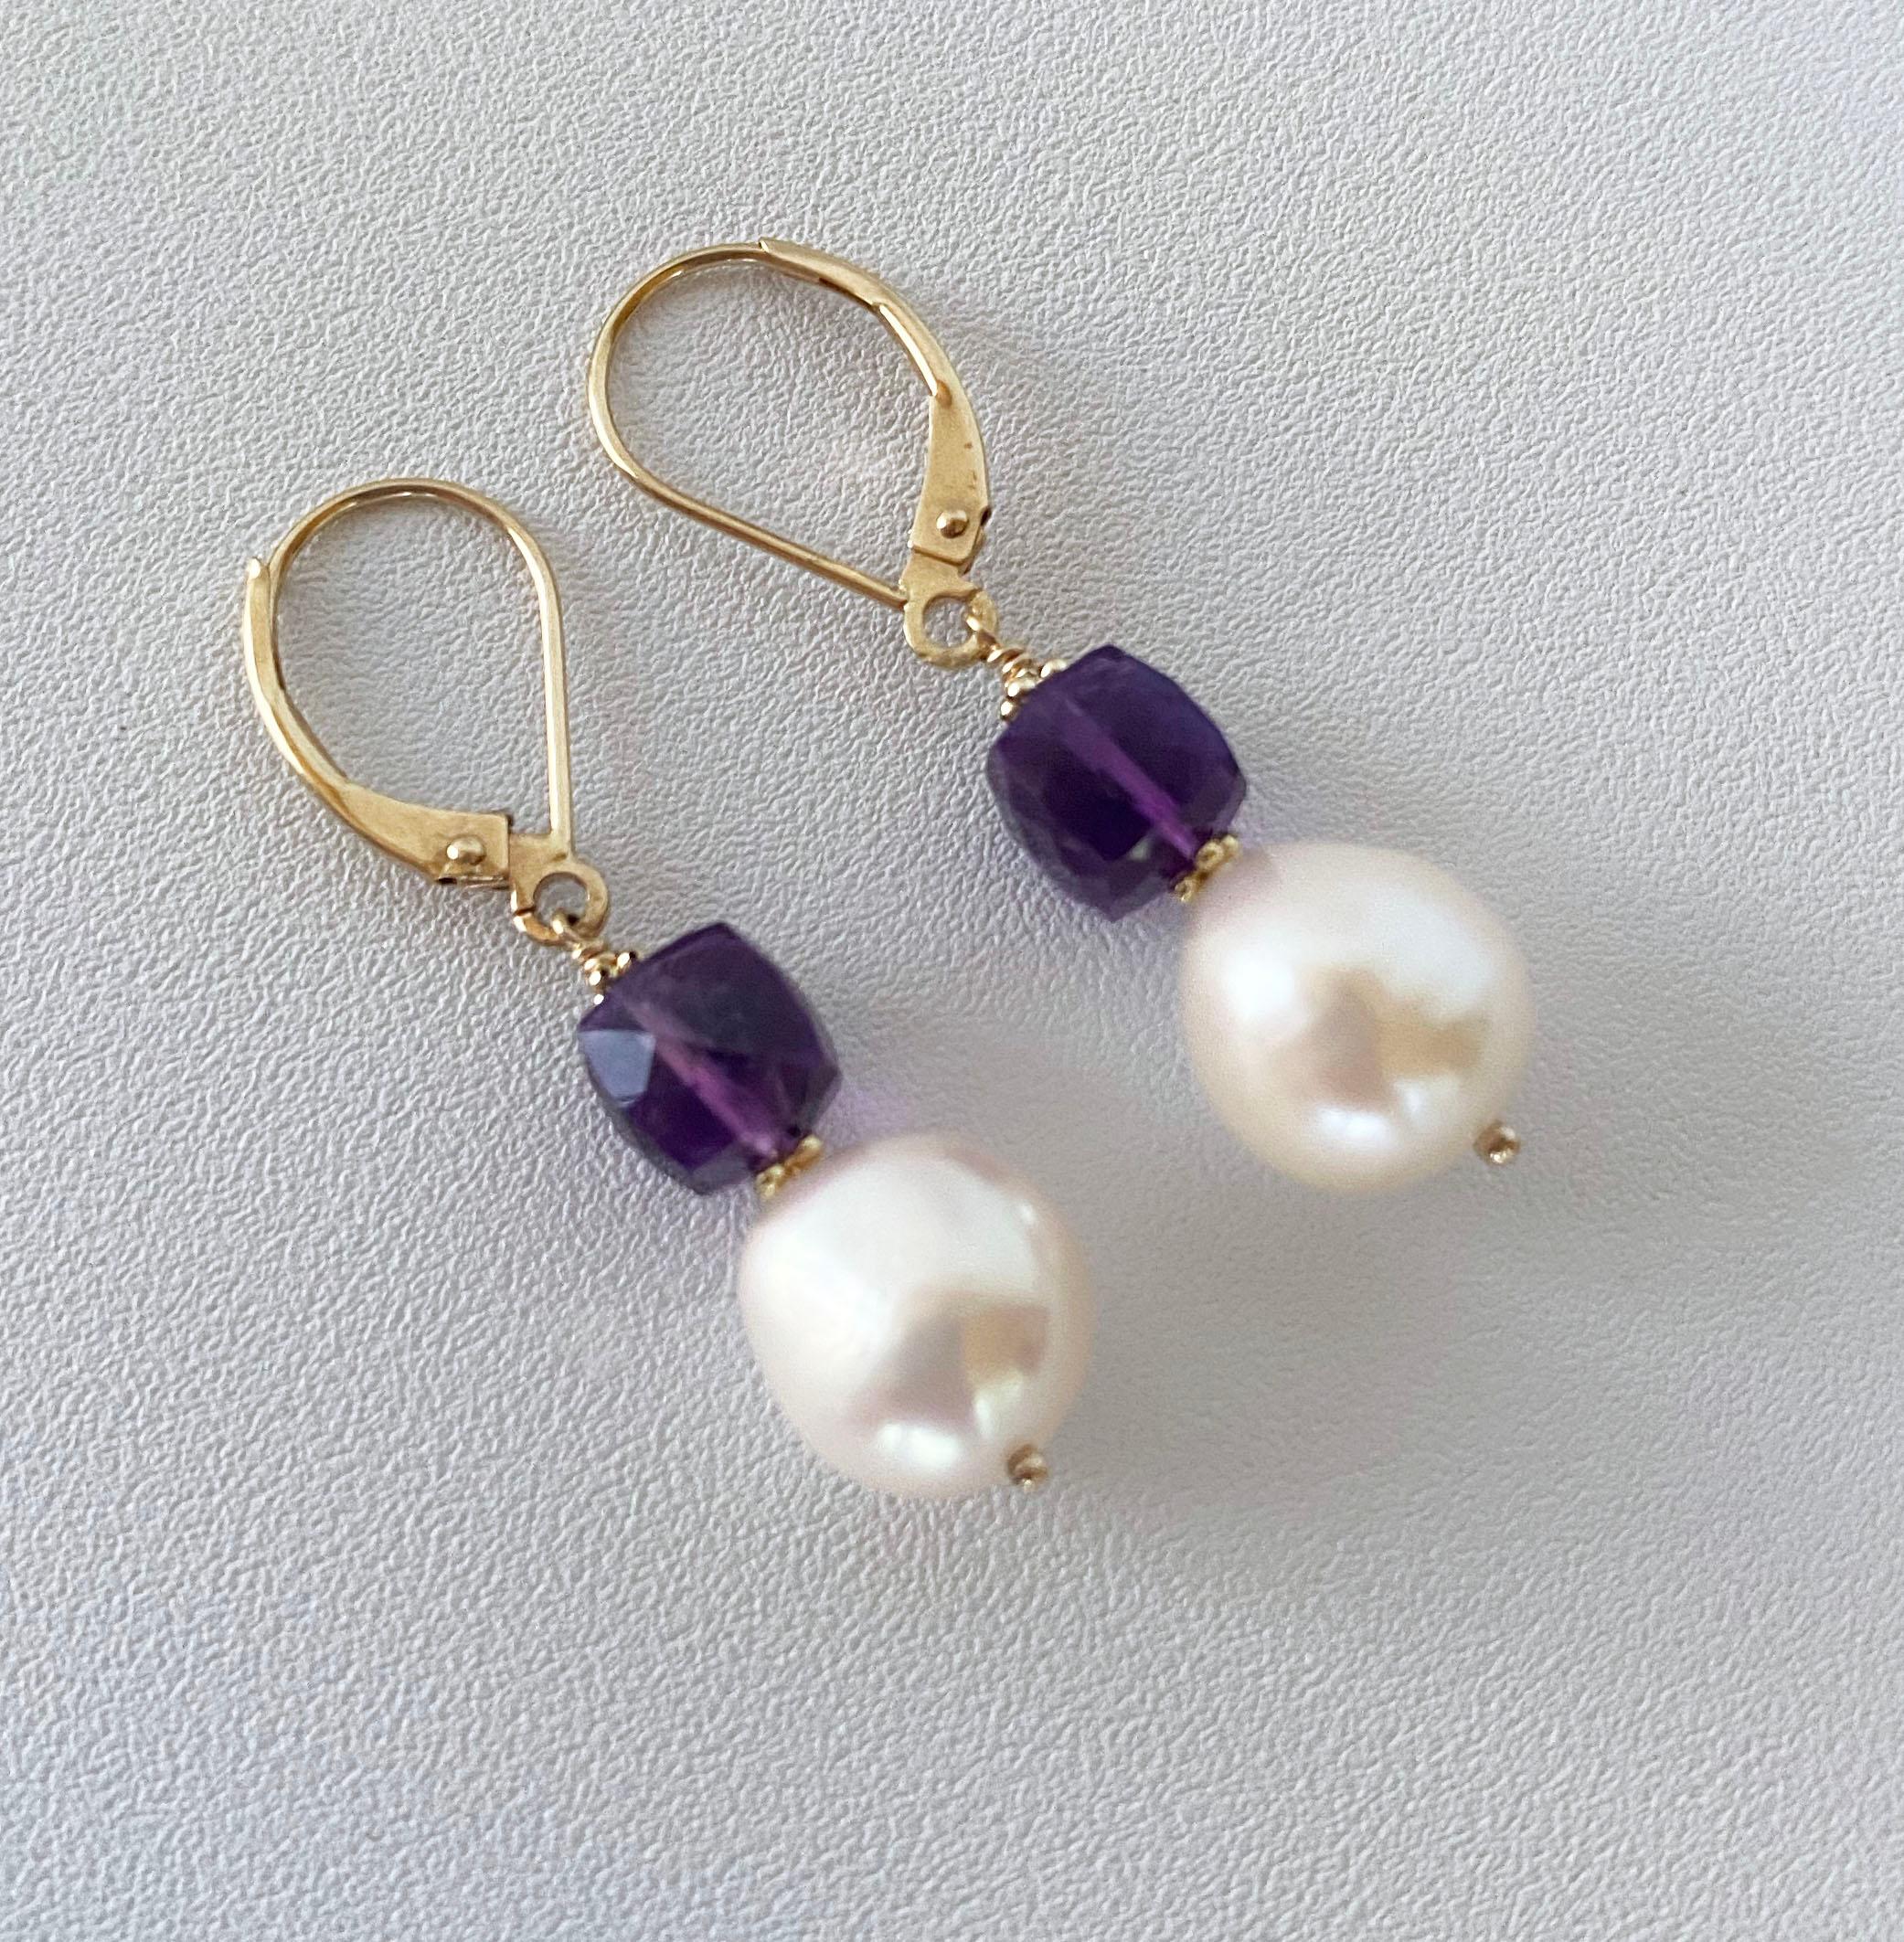 Gorgeous and simple pair of earrings made by Marina J. In Los Angeles. This pair features two gorgeous faceted square Amethysts from which slightly Baroque White/Cream Pearls hang. The Amethyst's translucency allows it to illuminate and radiate